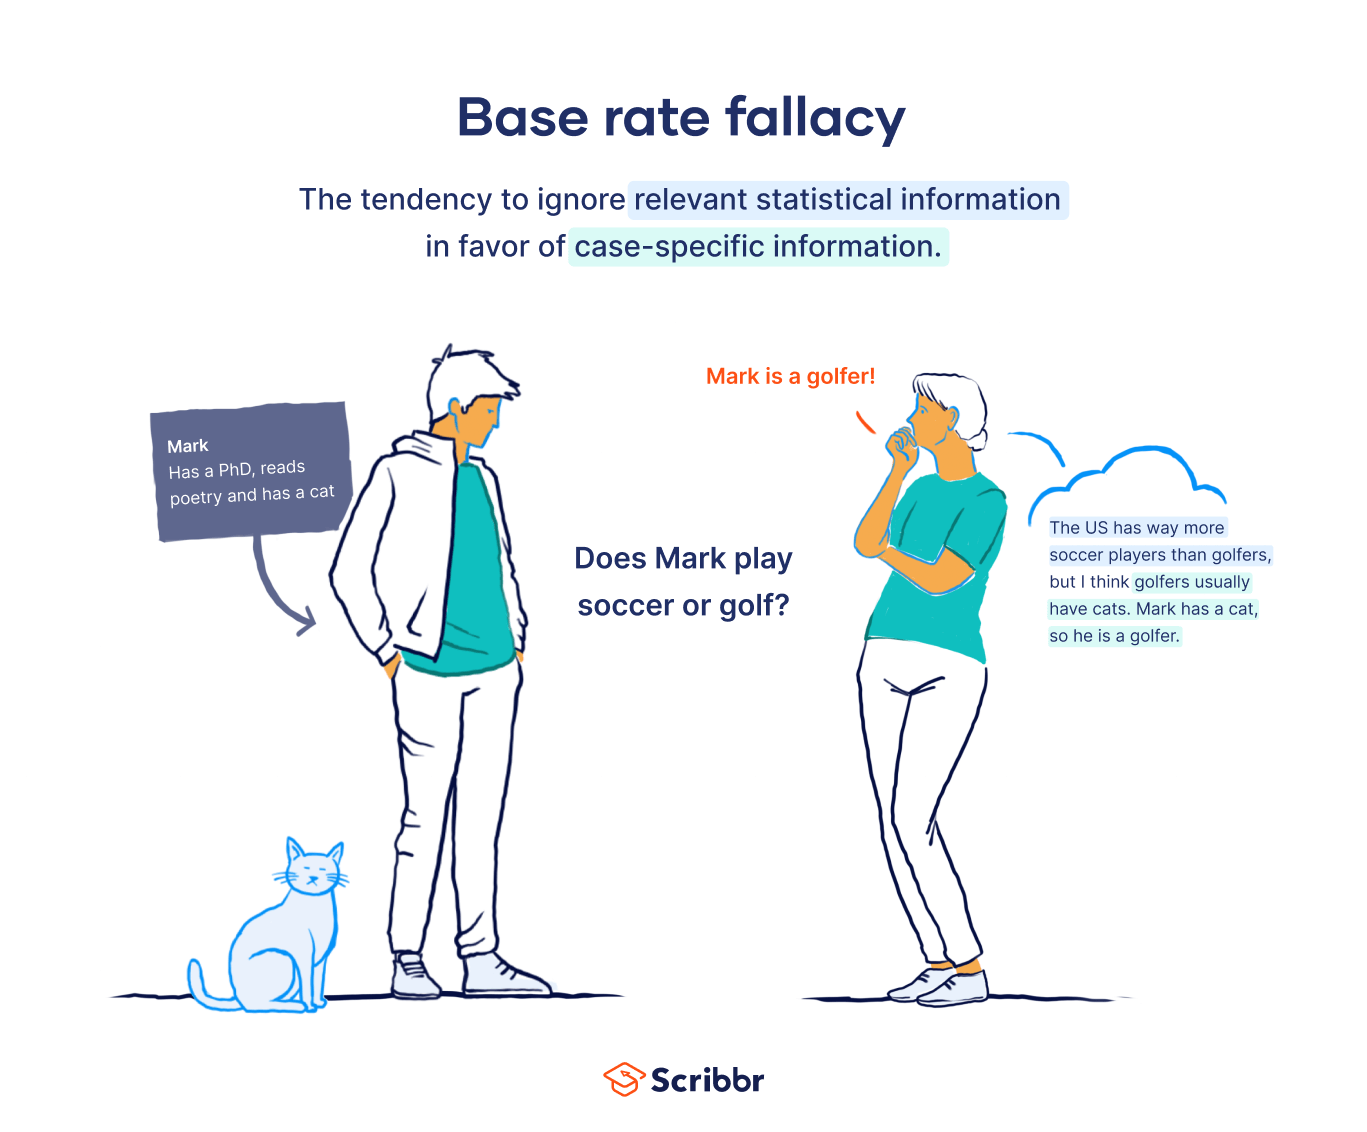 What is base rate fallacy?